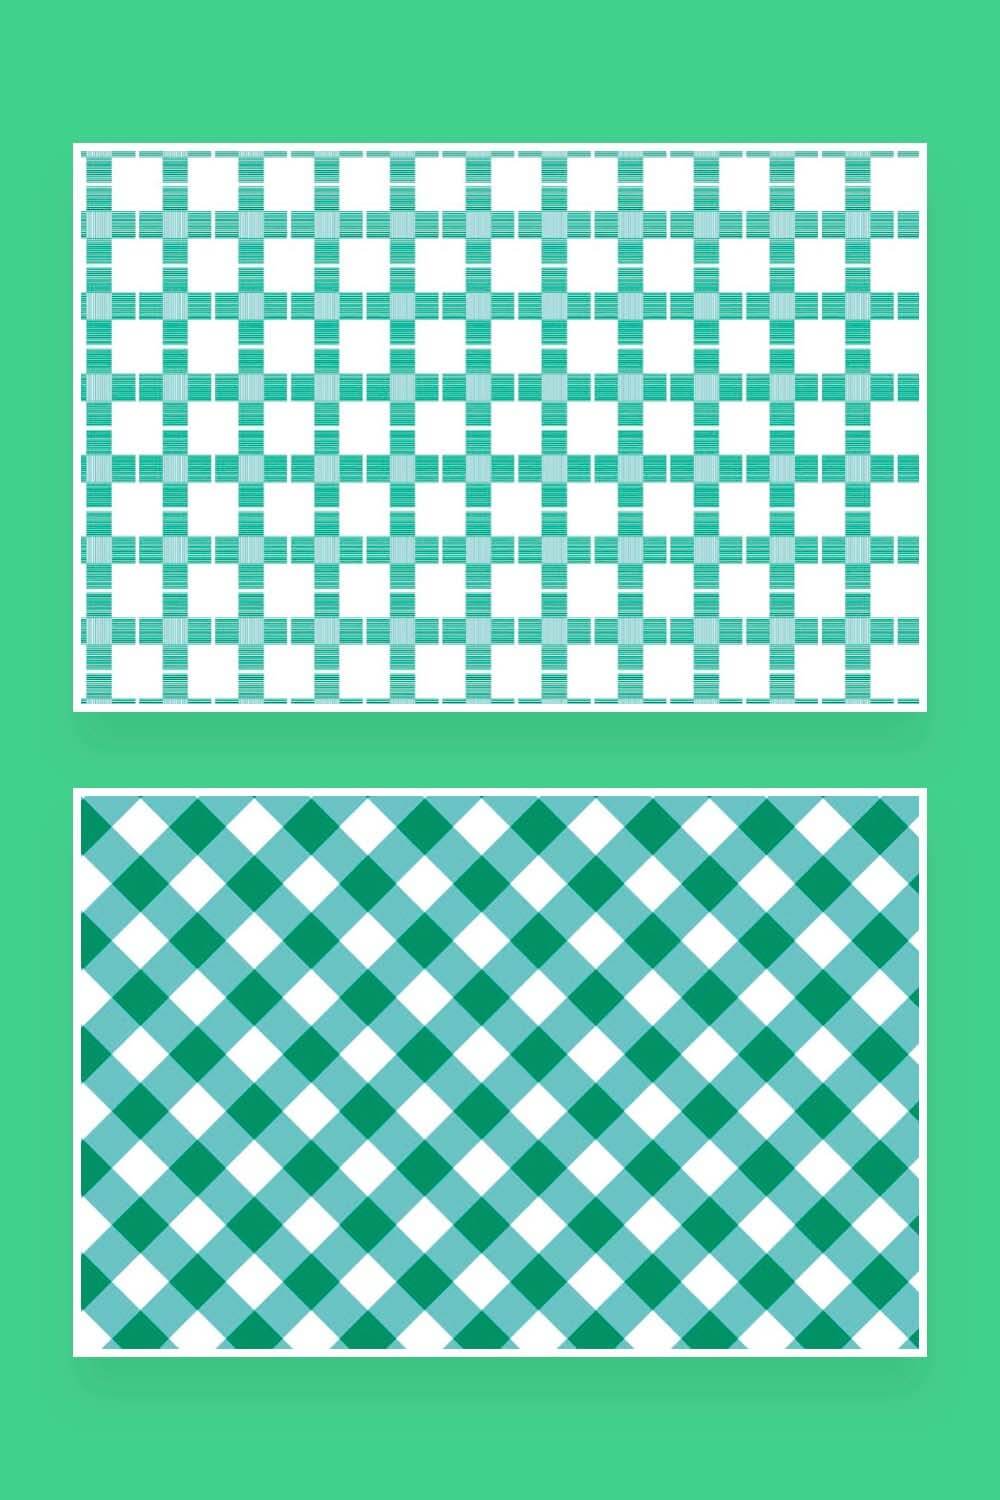 Two pictures of textile seamless patterns, cubes and rhombuses.